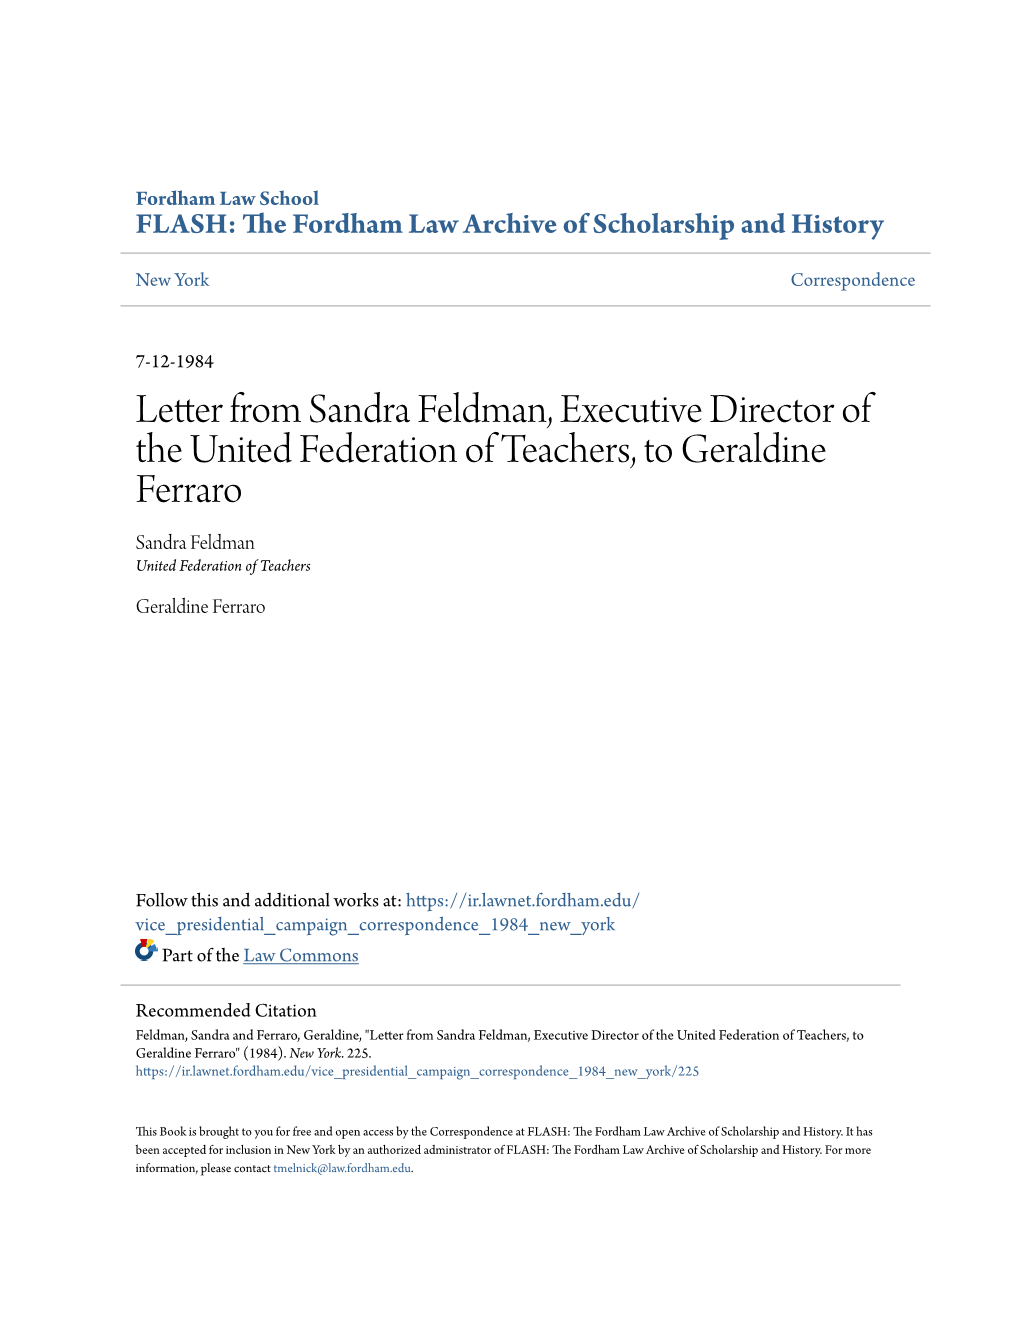 Letter from Sandra Feldman, Executive Director of the United Federation of Teachers, to Geraldine Ferraro Sandra Feldman United Federation of Teachers